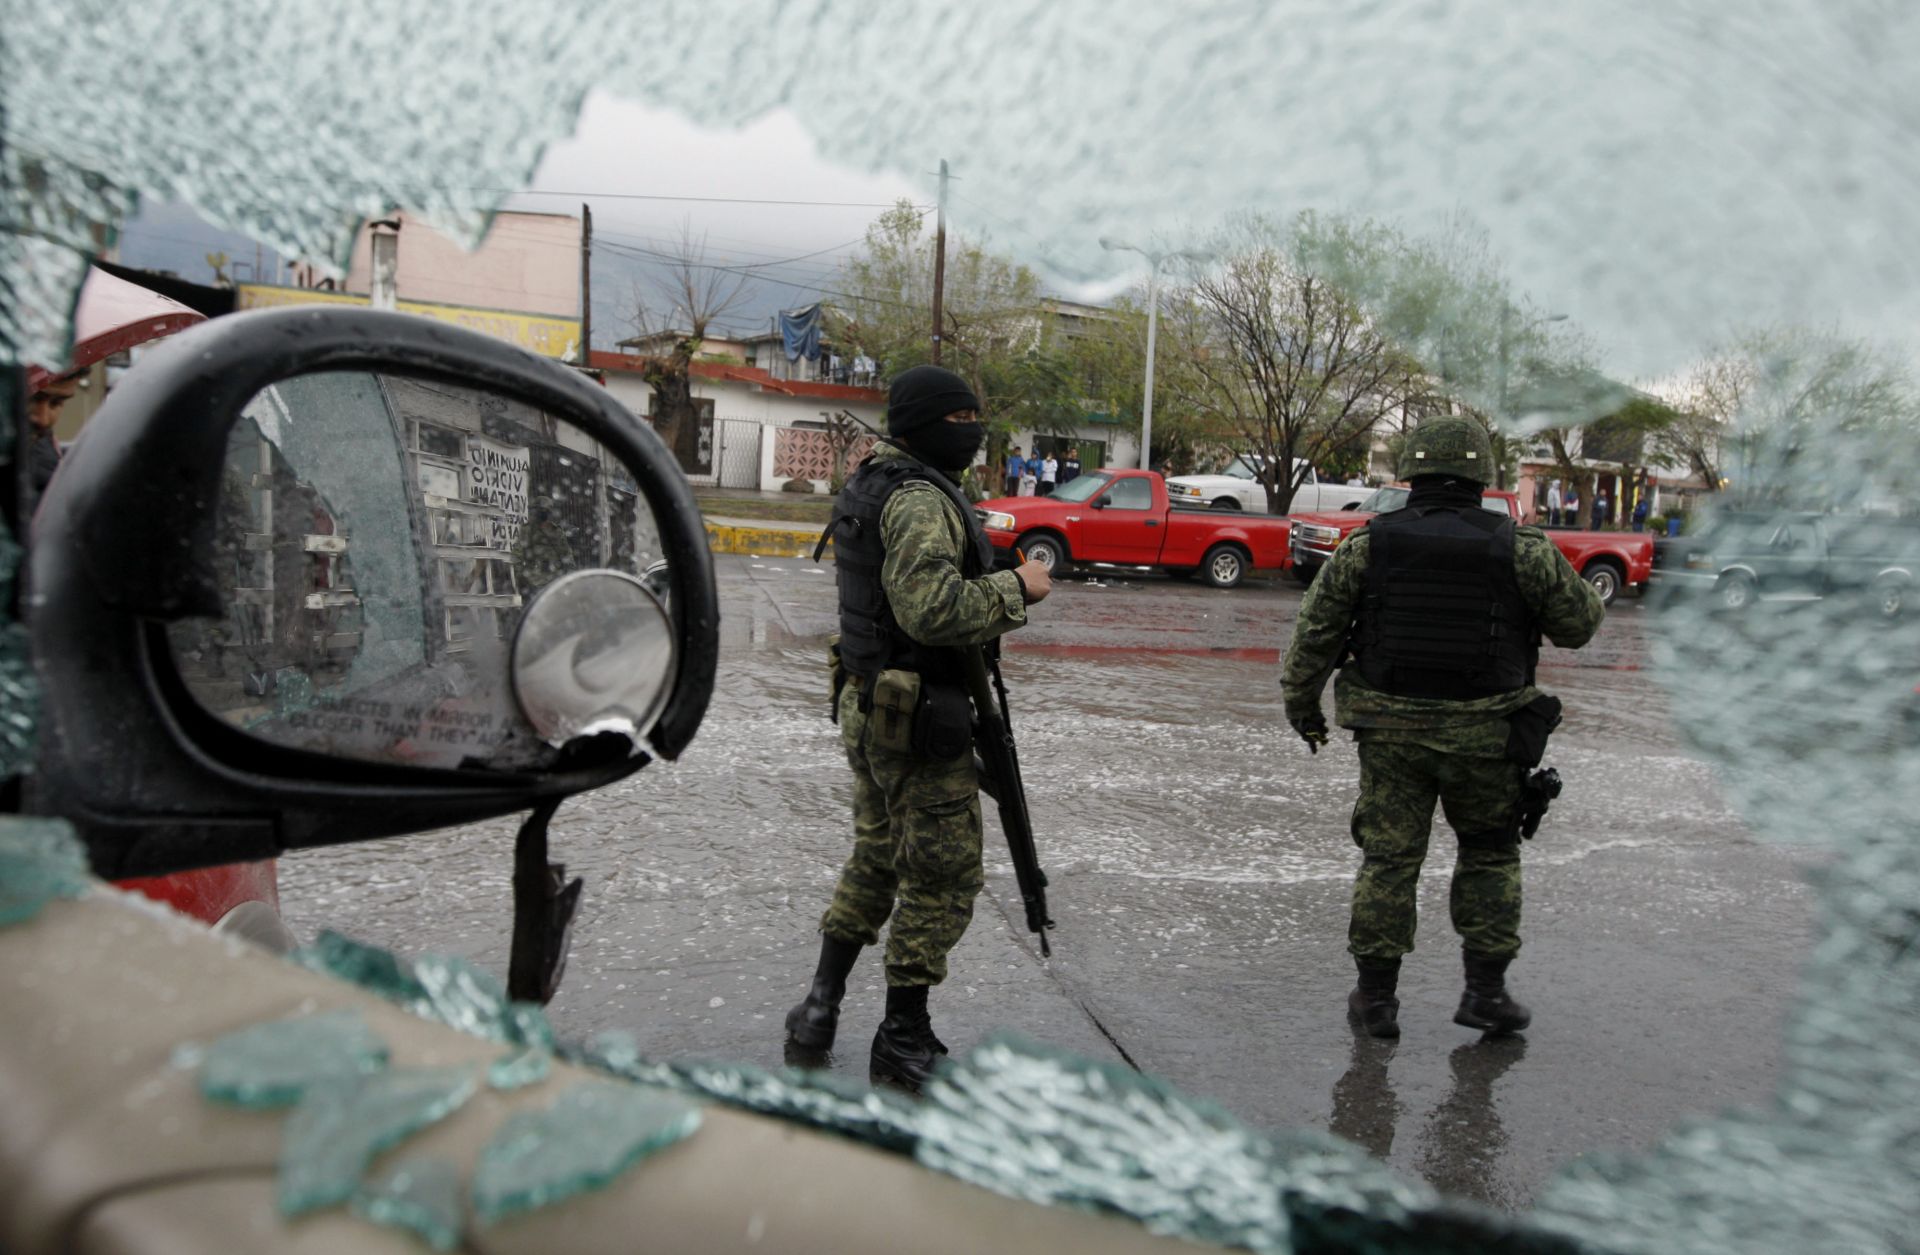 Soldiers in February 2012 in Monterrey, Mexico, at the scene of drug violence.